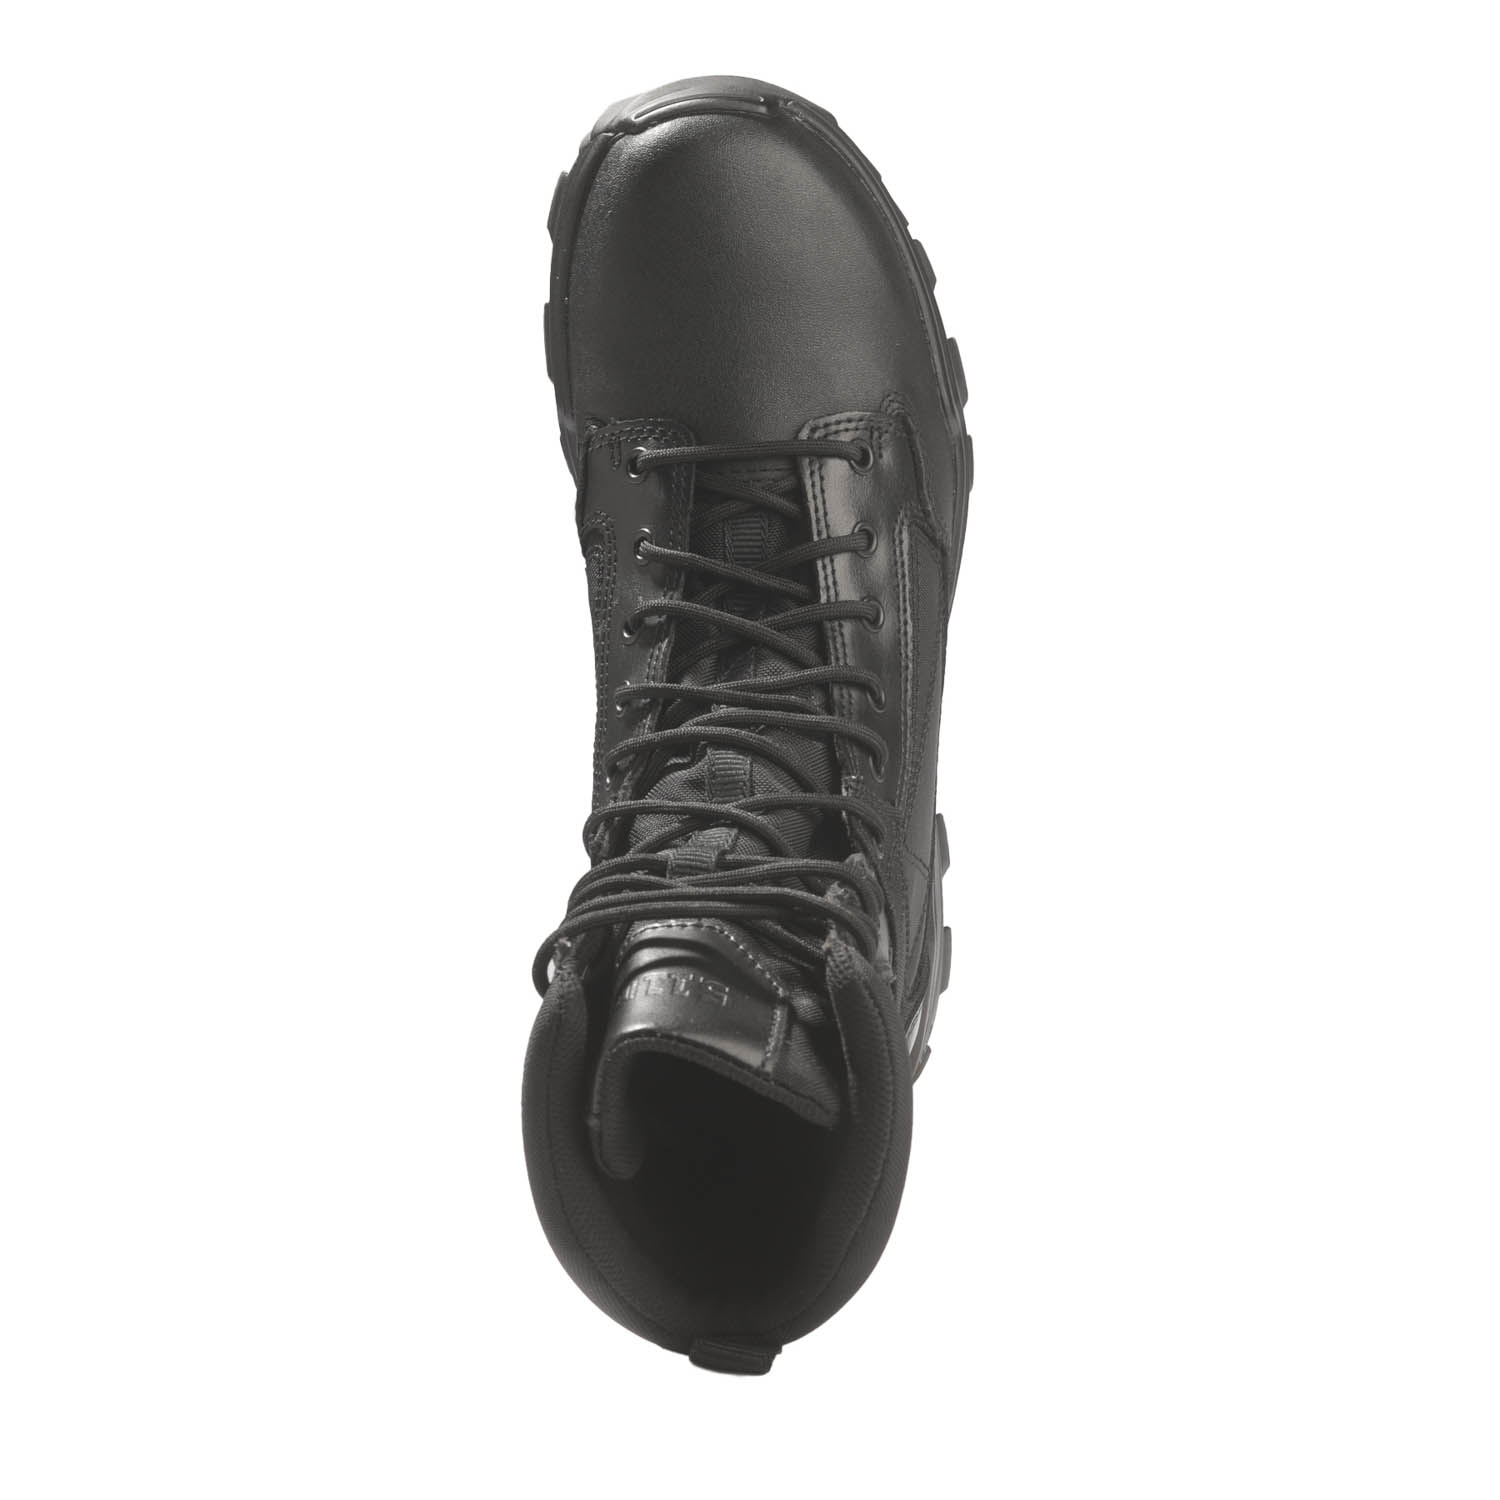 5.11 Tactical A/T 8" Side Zip Boot